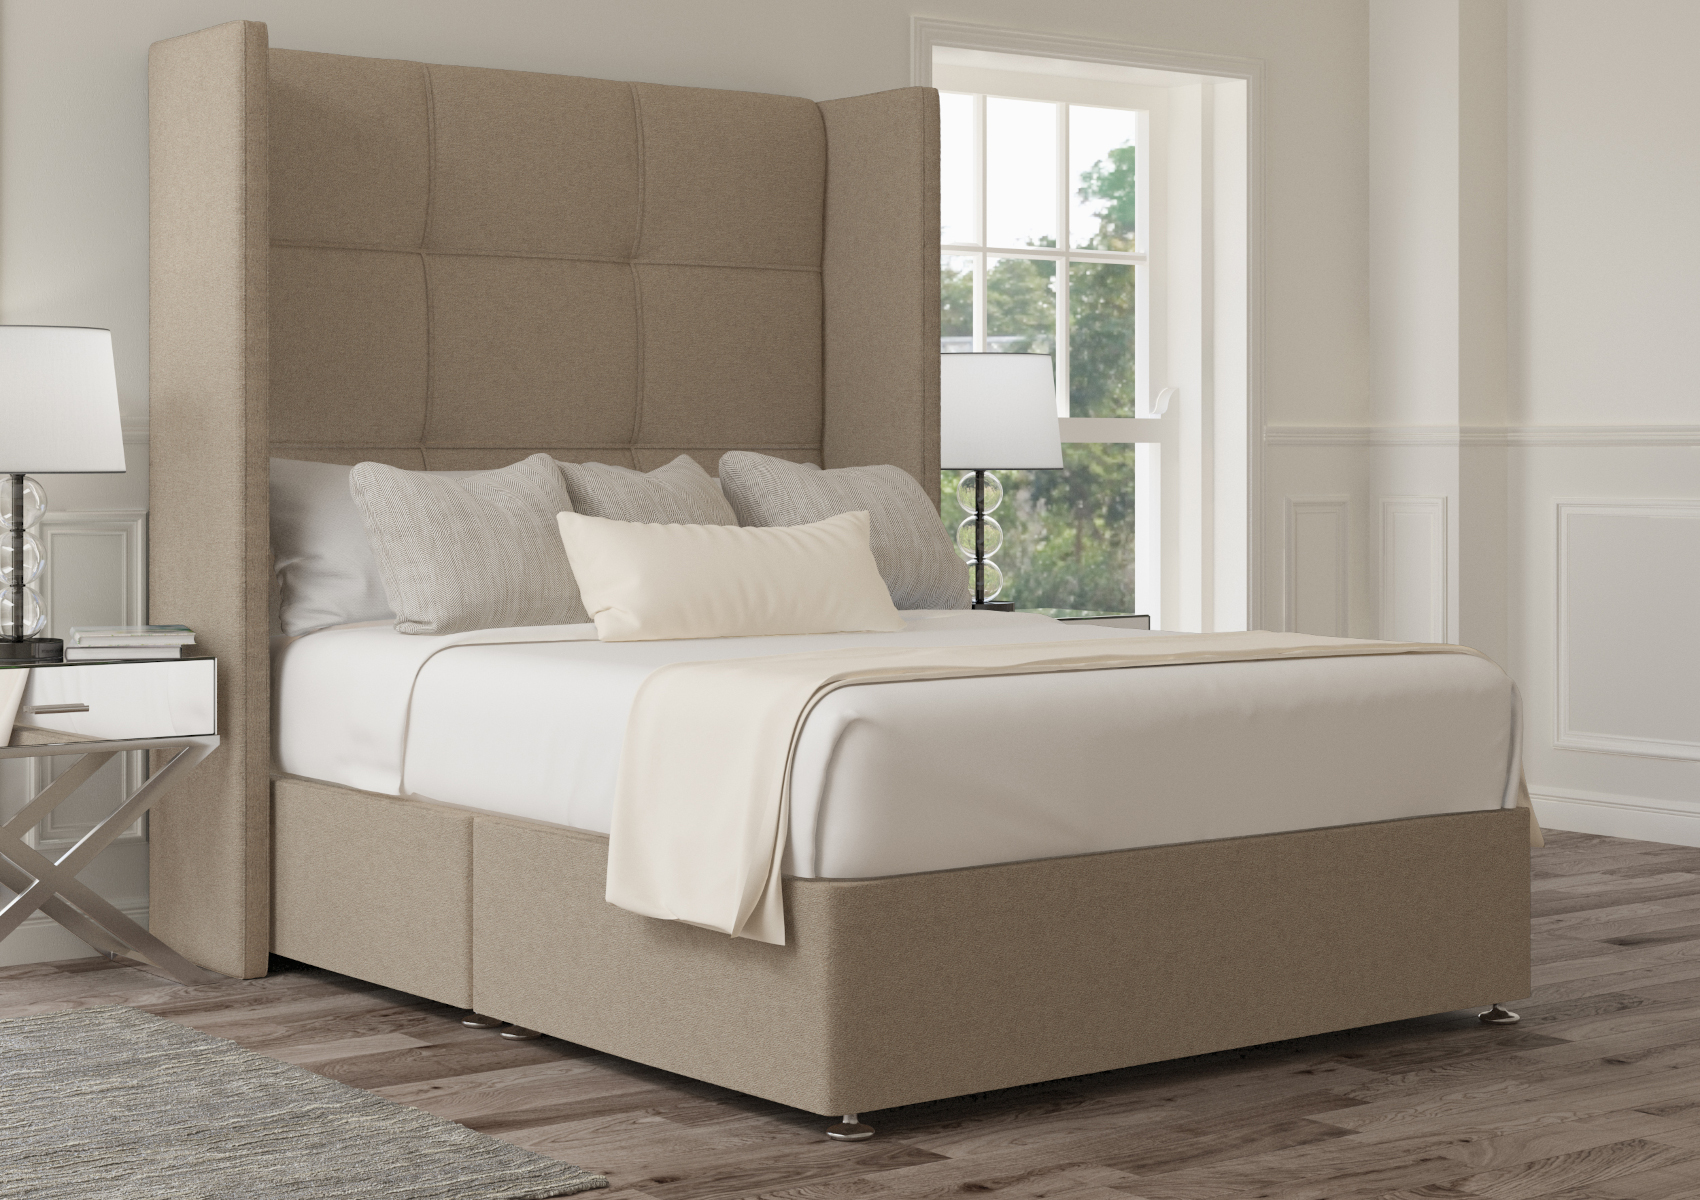 View Oaklyn Trebla Flax Upholstered Double Winged Bed Time4Sleep information